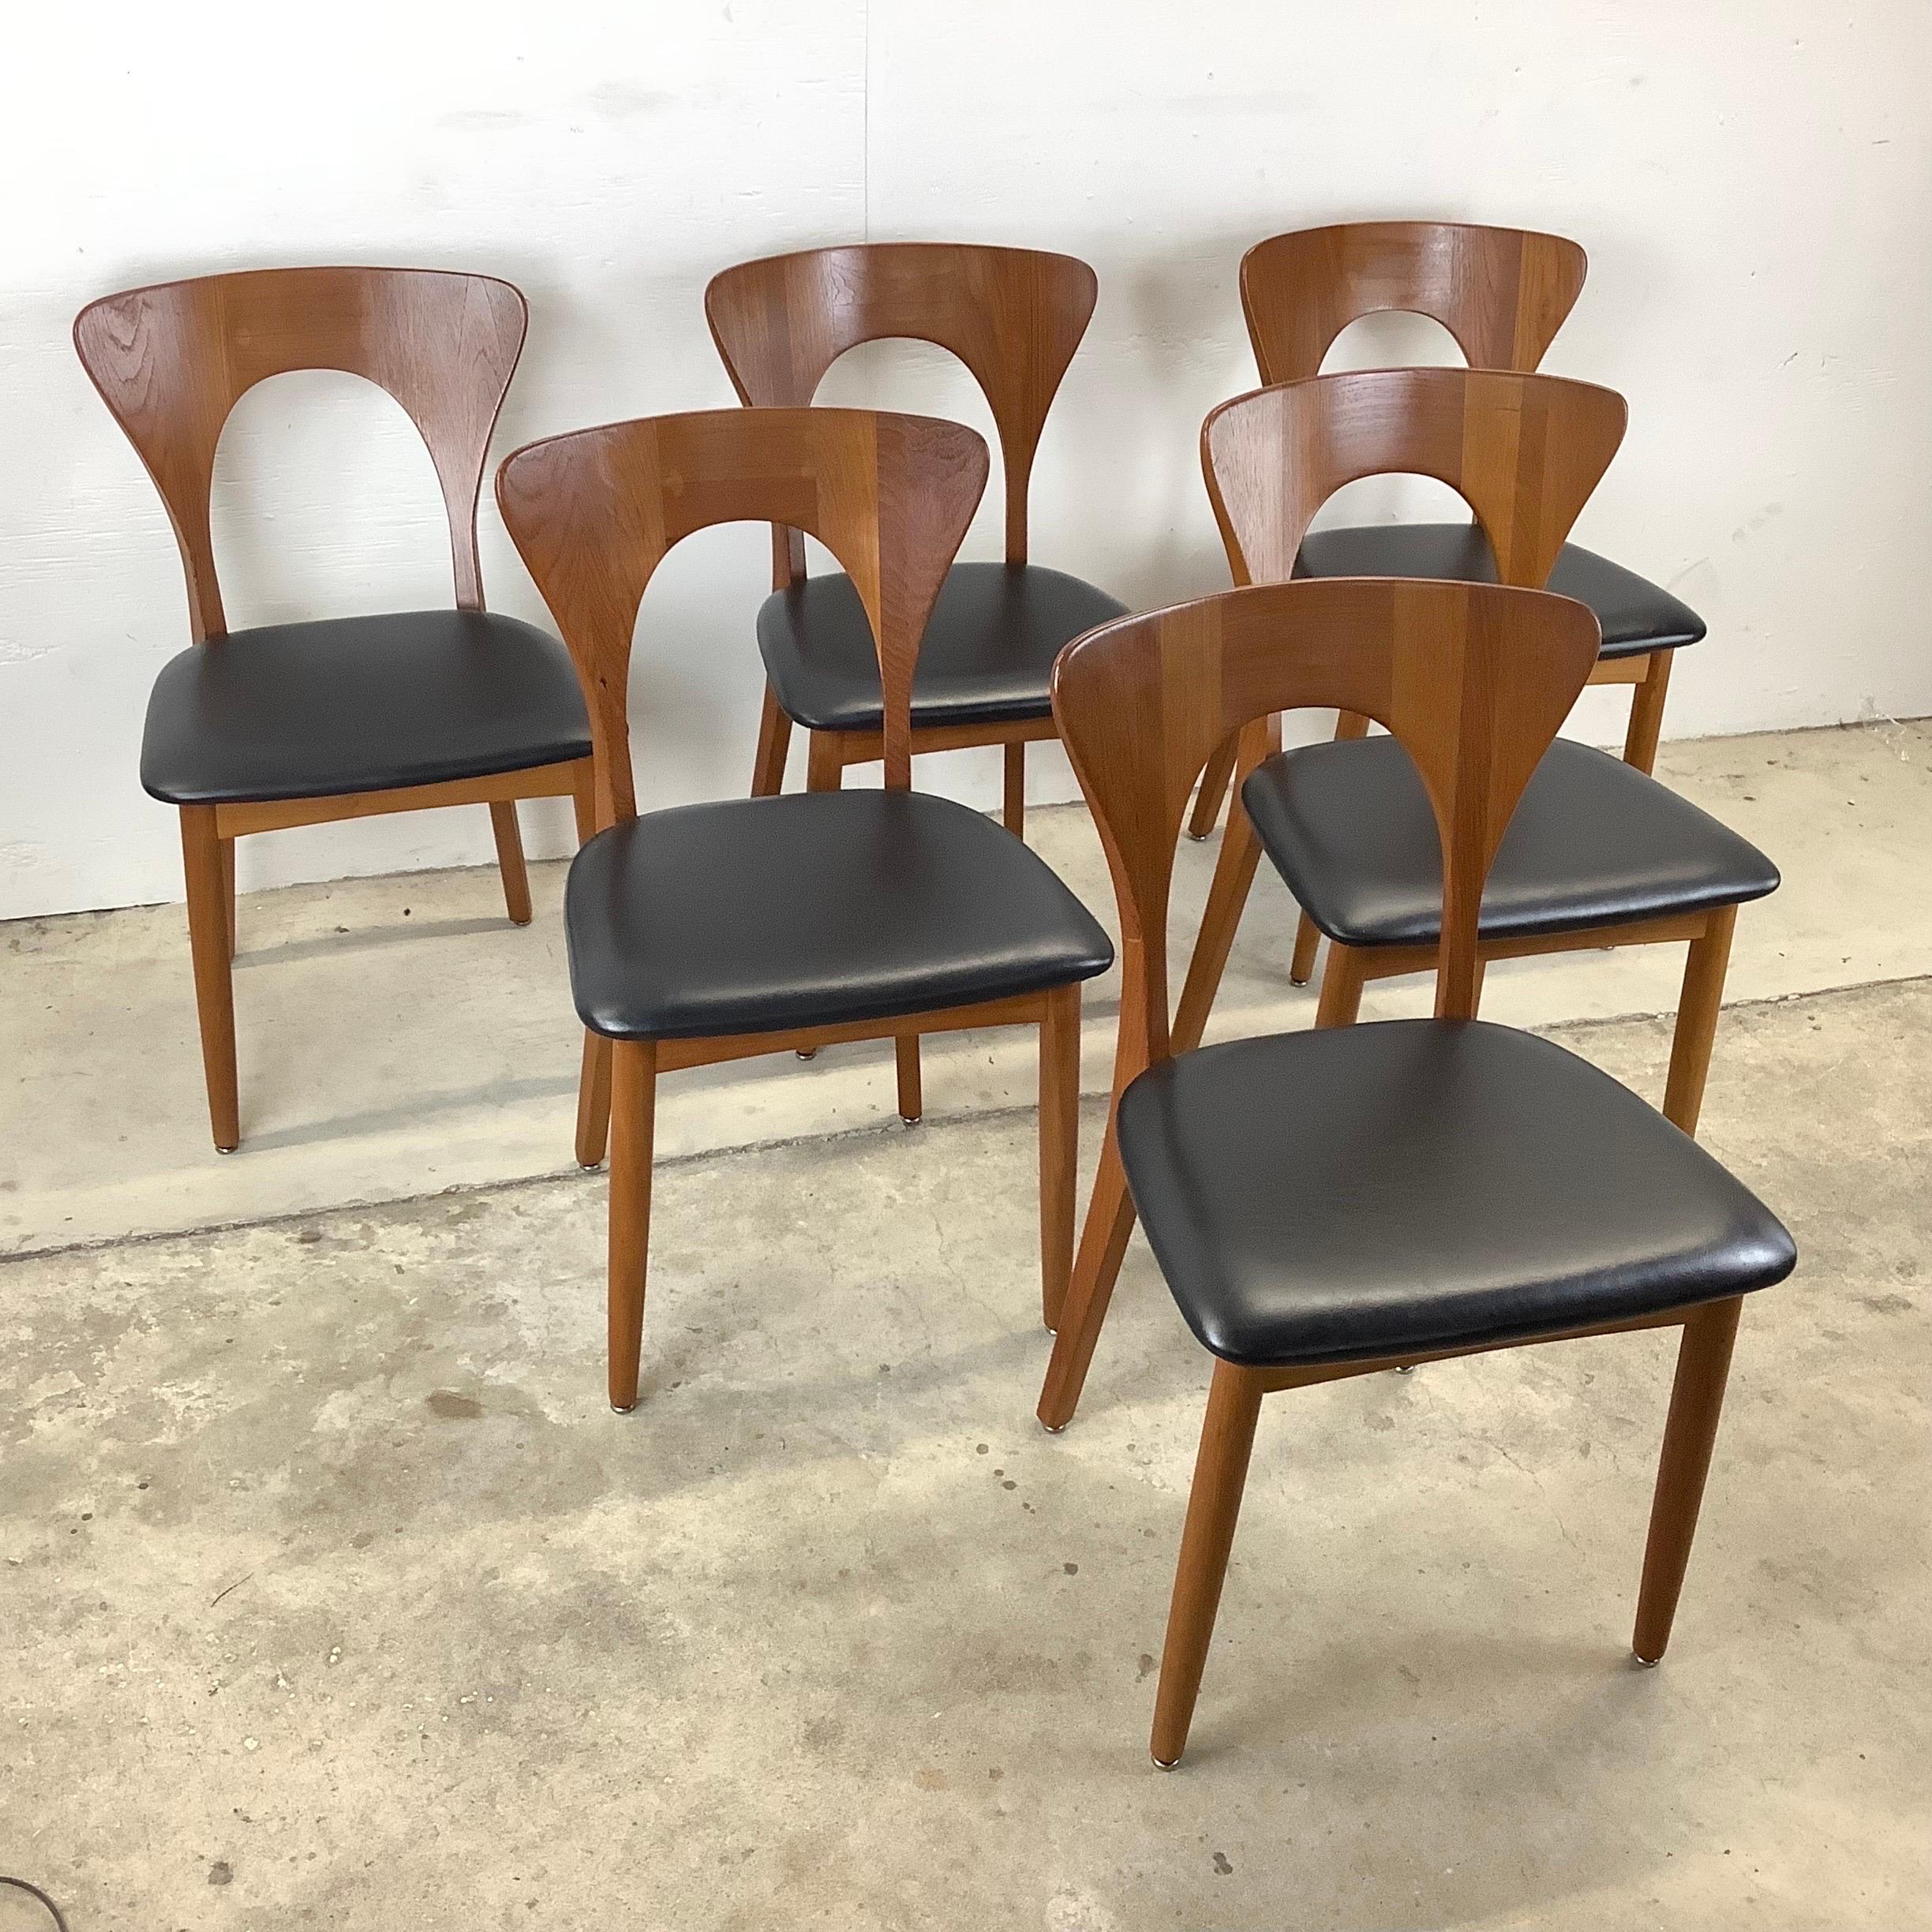 This striking set of Mid-Century Modern dining chairs feature iconic sculptural teak seat backs from Niels Koefoed for Koefoed Hornslet. The Scandinavian Modern appeal of the vintage teak finish, comfortable proportions, and impressive craftsmanship